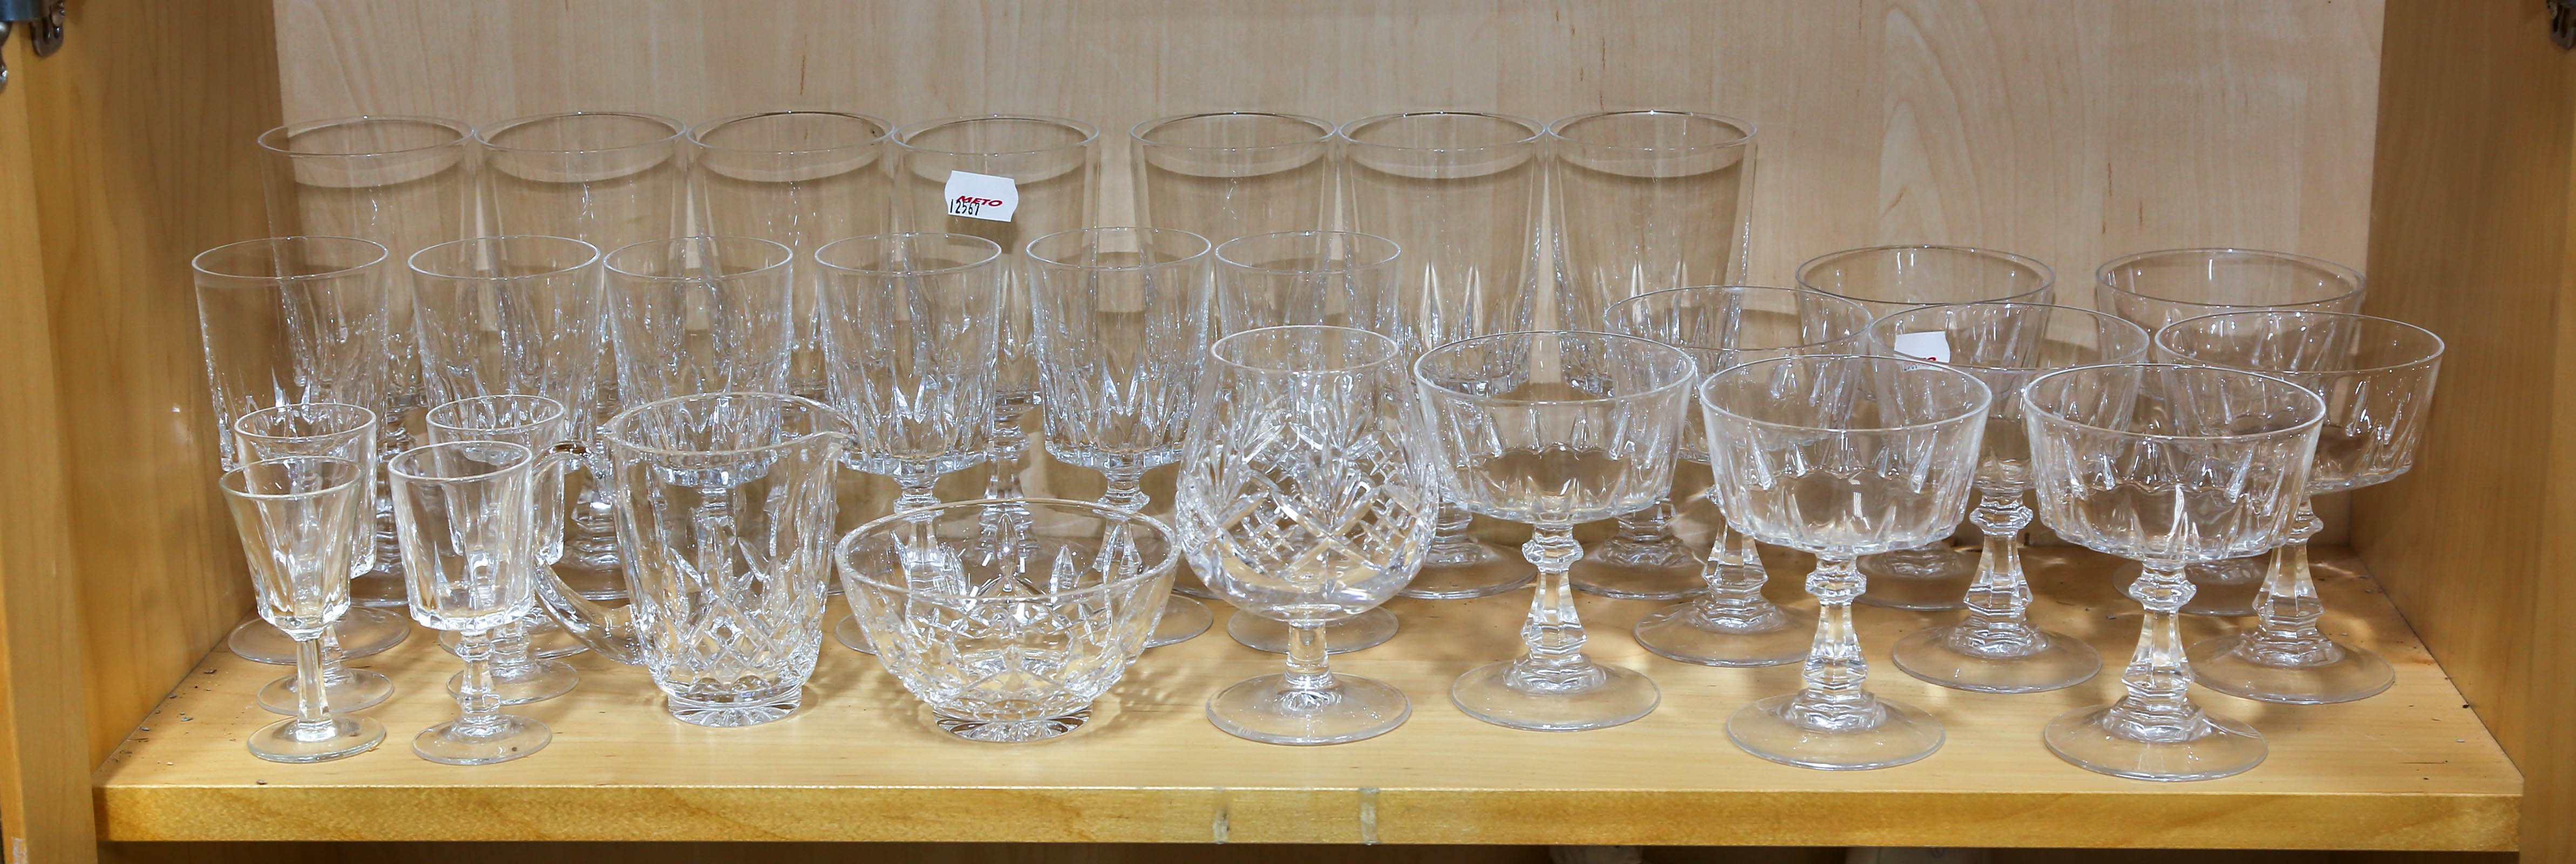 ASSORTMENT OF USEFUL PRESSED GLASSWARE 308a07